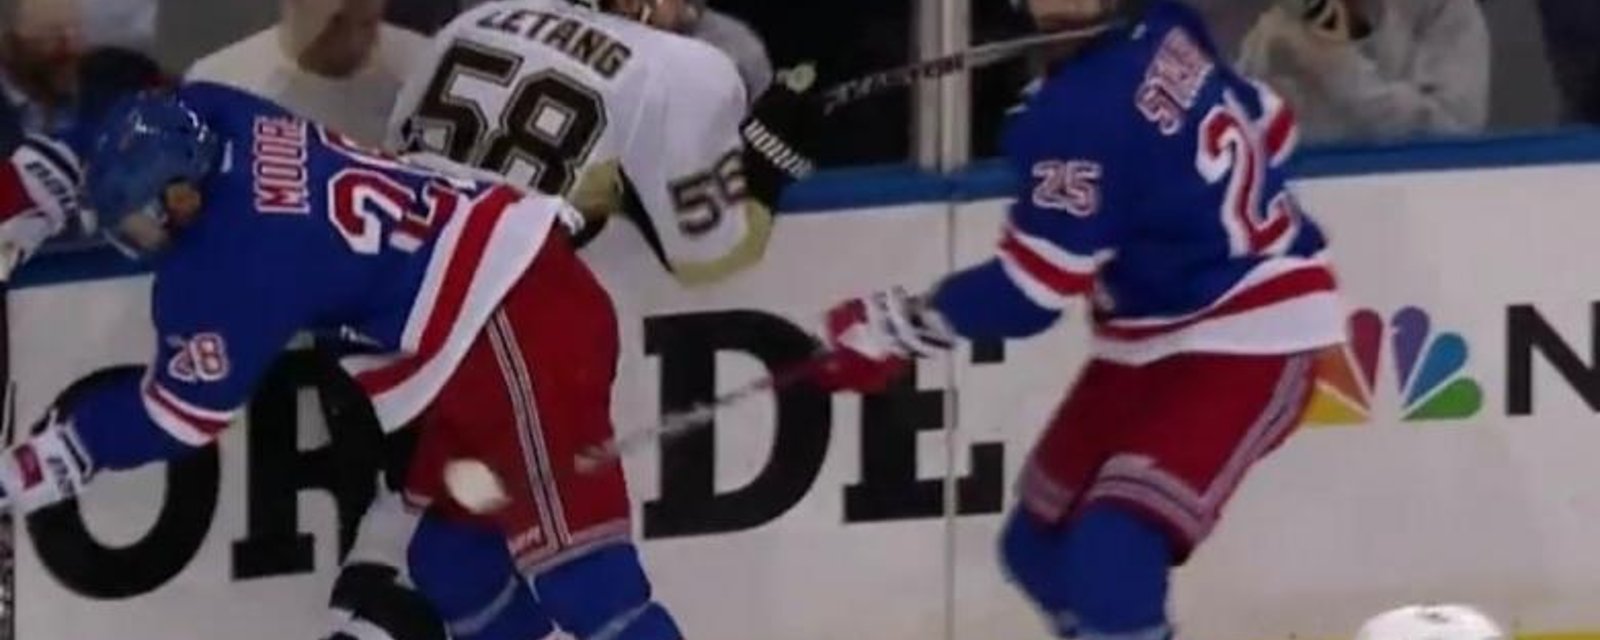 Stalberg says Letang lied about apologizing for his ugly slash to the face.